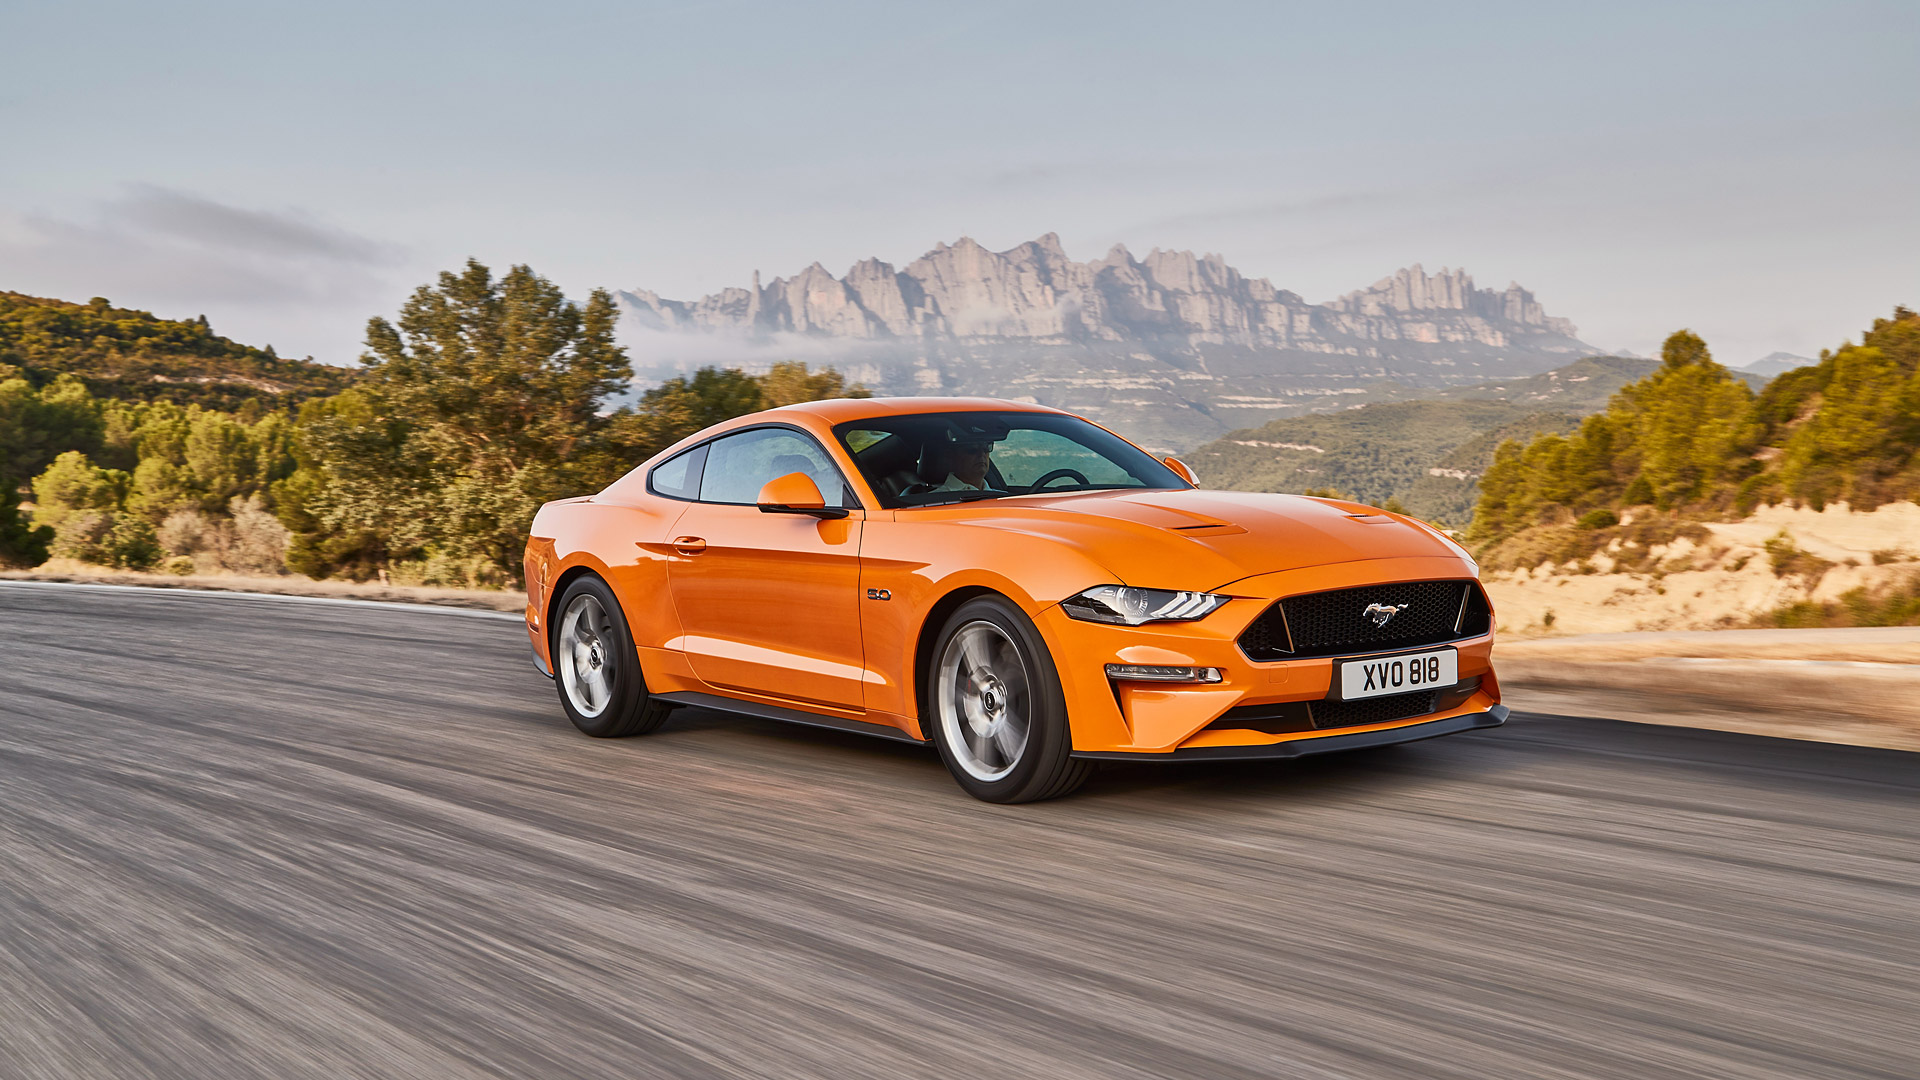 Ford Mustang Gt Wallpaper HD Image Wsupercars